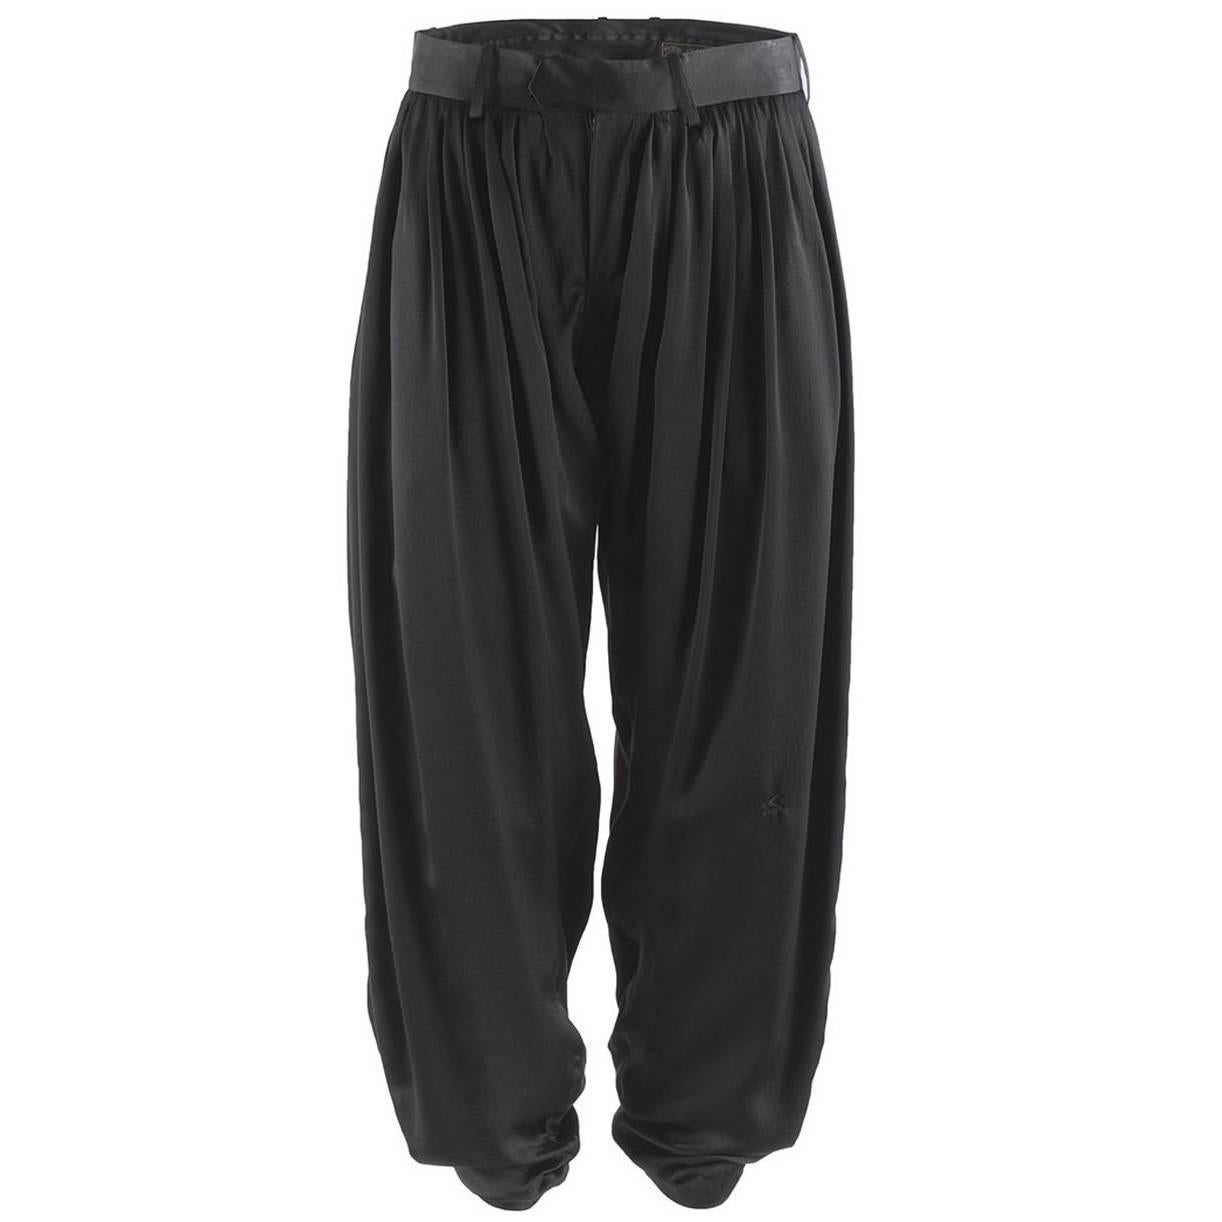 Undercover Black Pleated Silk Harem Pants For Sale